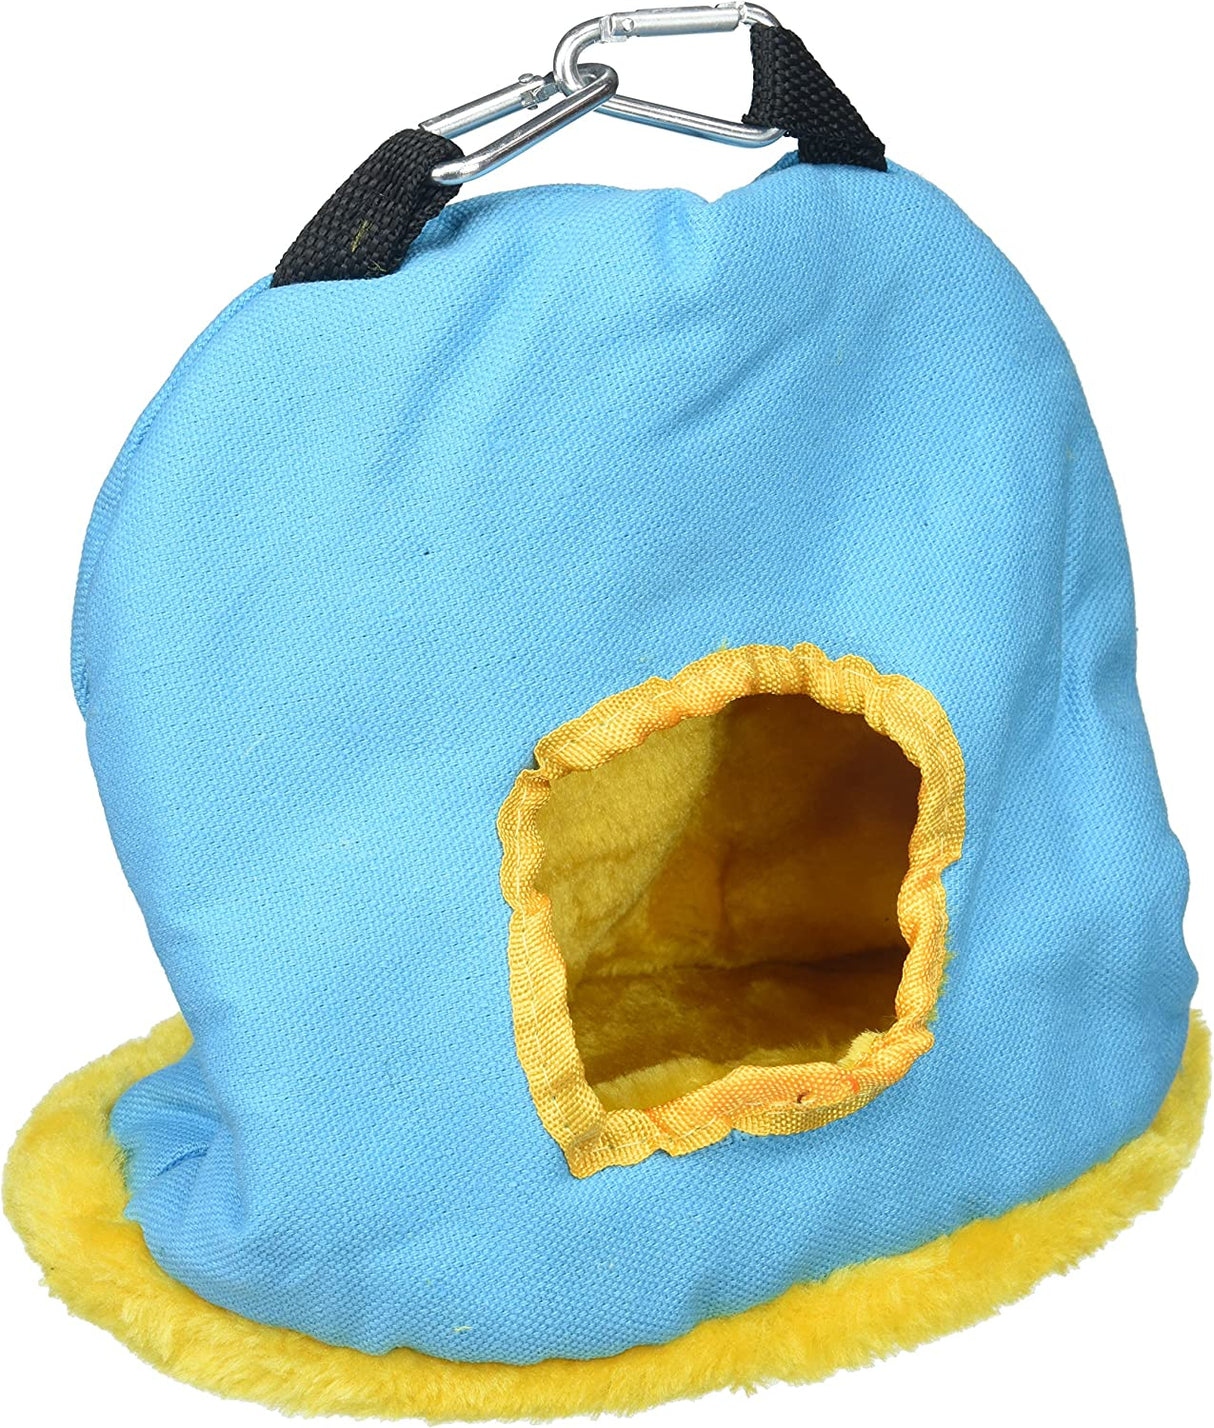 1 count Prevue Snuggle Sack Medium Bird Shelter for Sleeping, Playing and Hiding